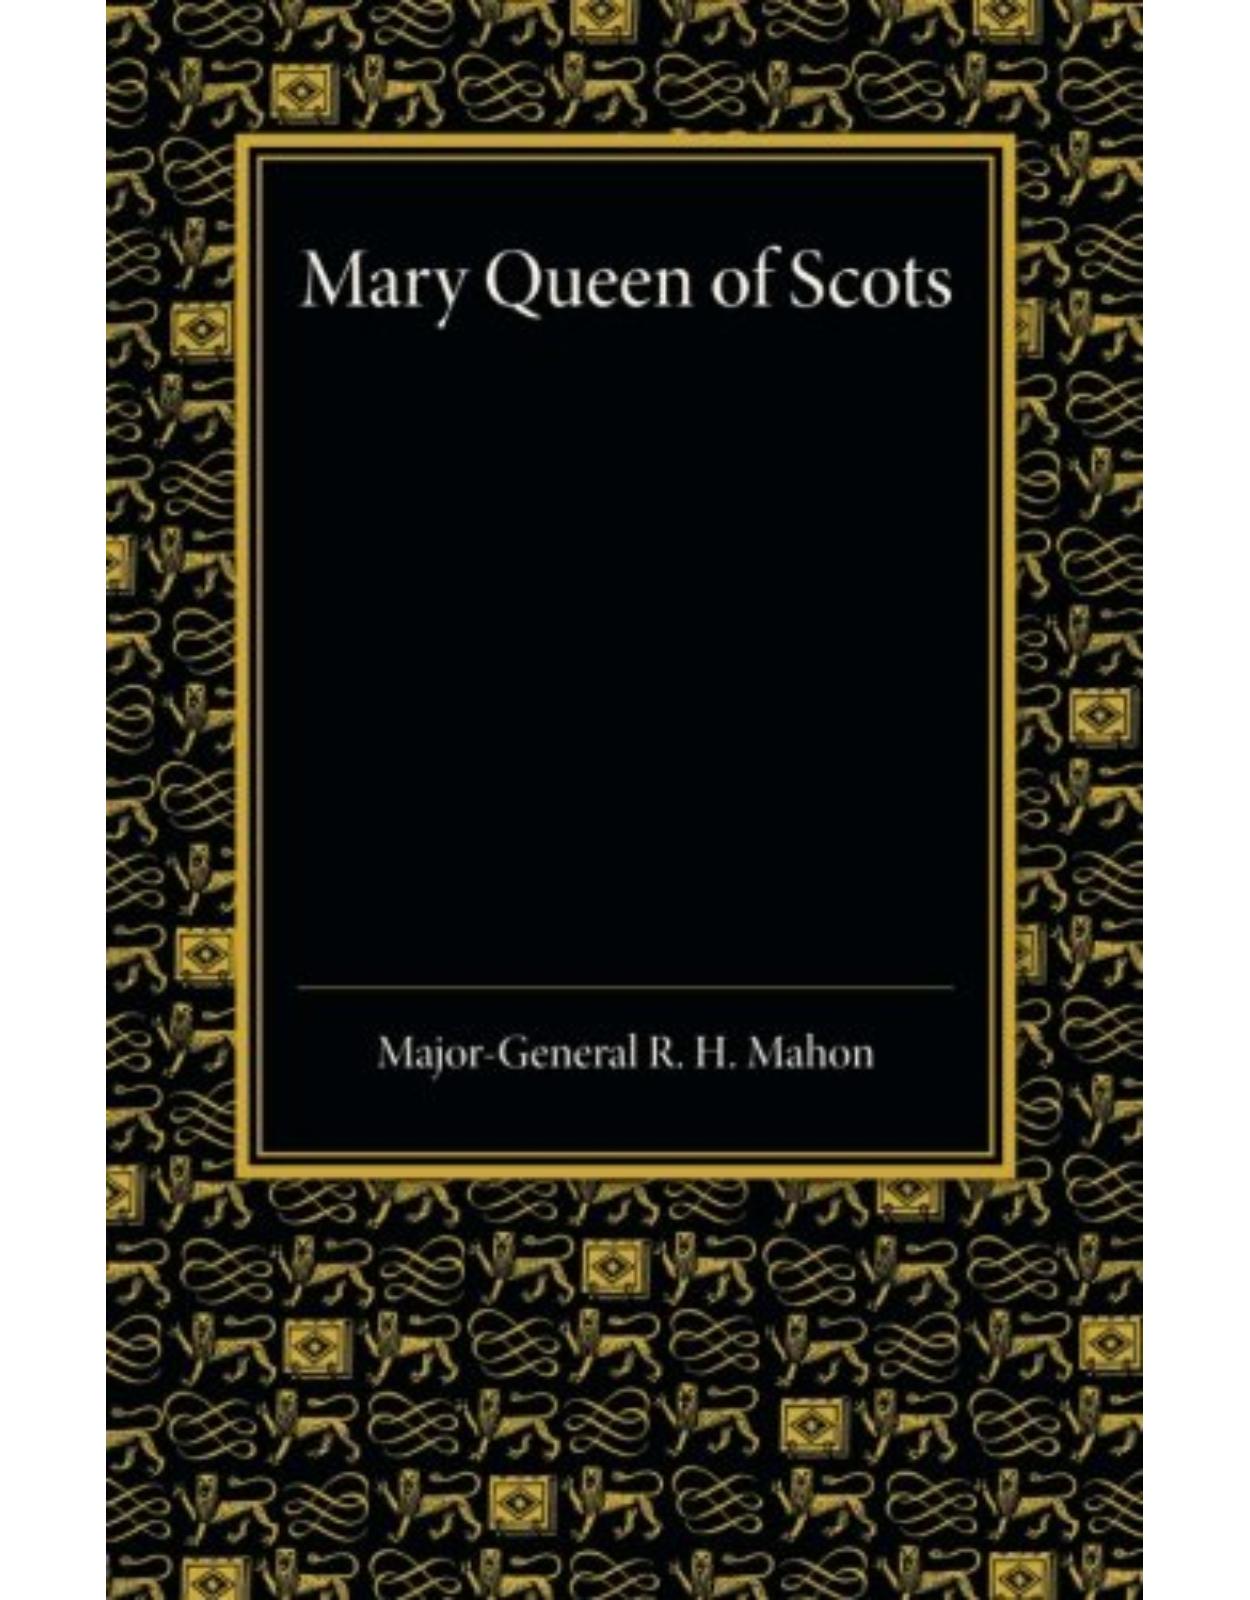 Mary Queen of Scots: A Study of the Lennox Narrative in the University Library at Cambridge